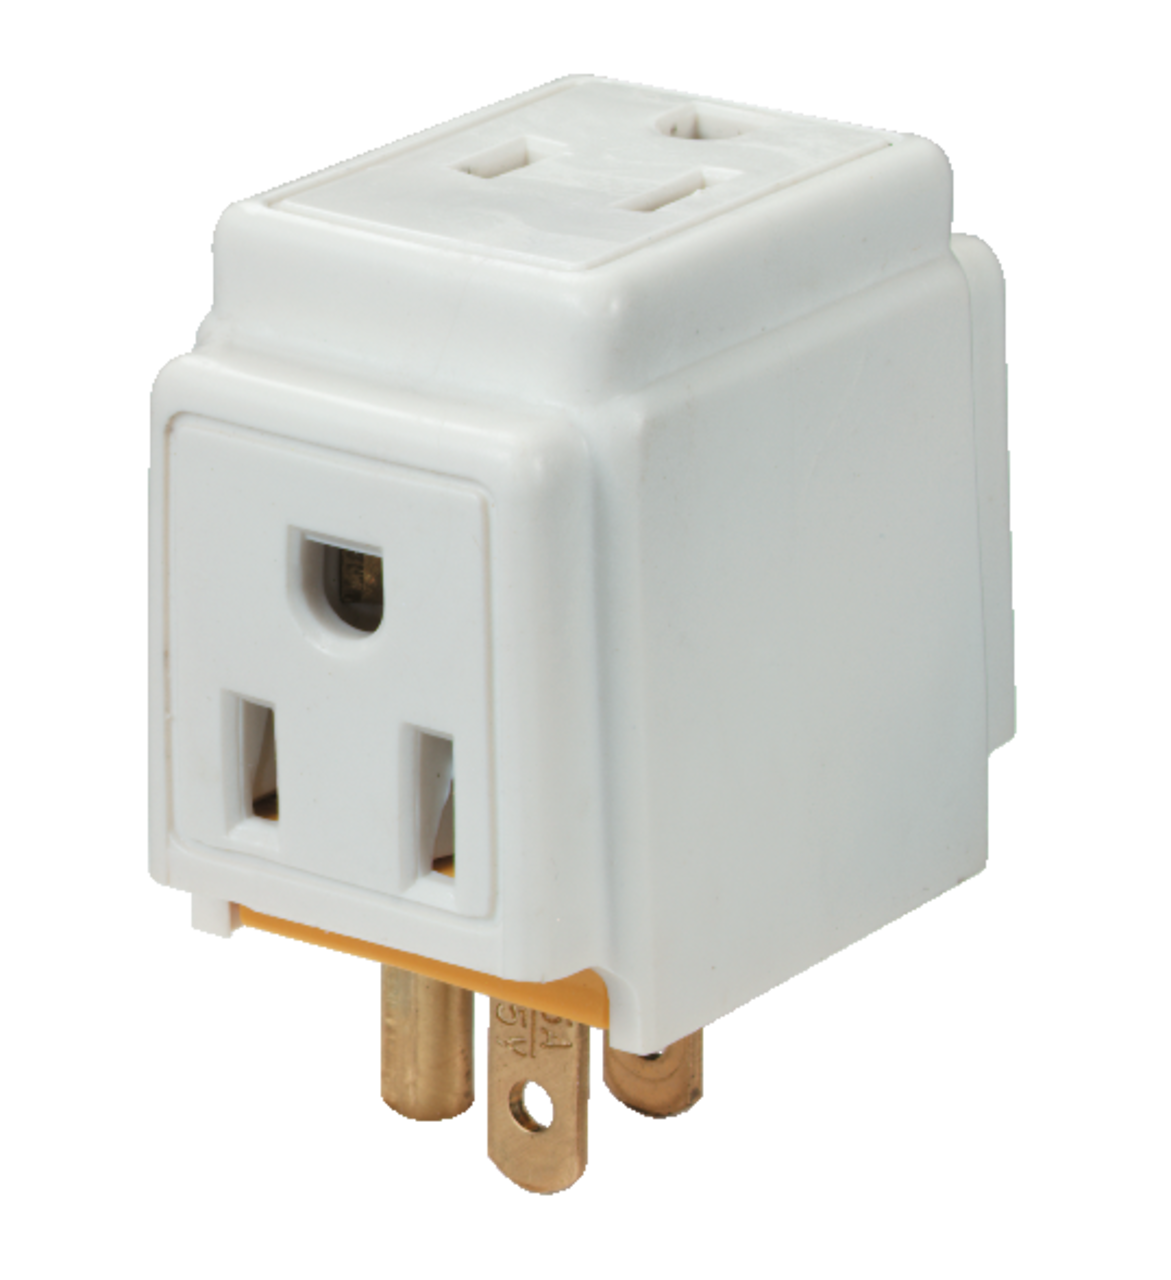 https://media-www.canadiantire.ca/product/fixing/electrical/rough-electrical/0521578/tap-cube-3-wire-white-b0dbbf61-4fb5-4c04-929c-08256896c3ea.png?imdensity=1&imwidth=640&impolicy=mZoom